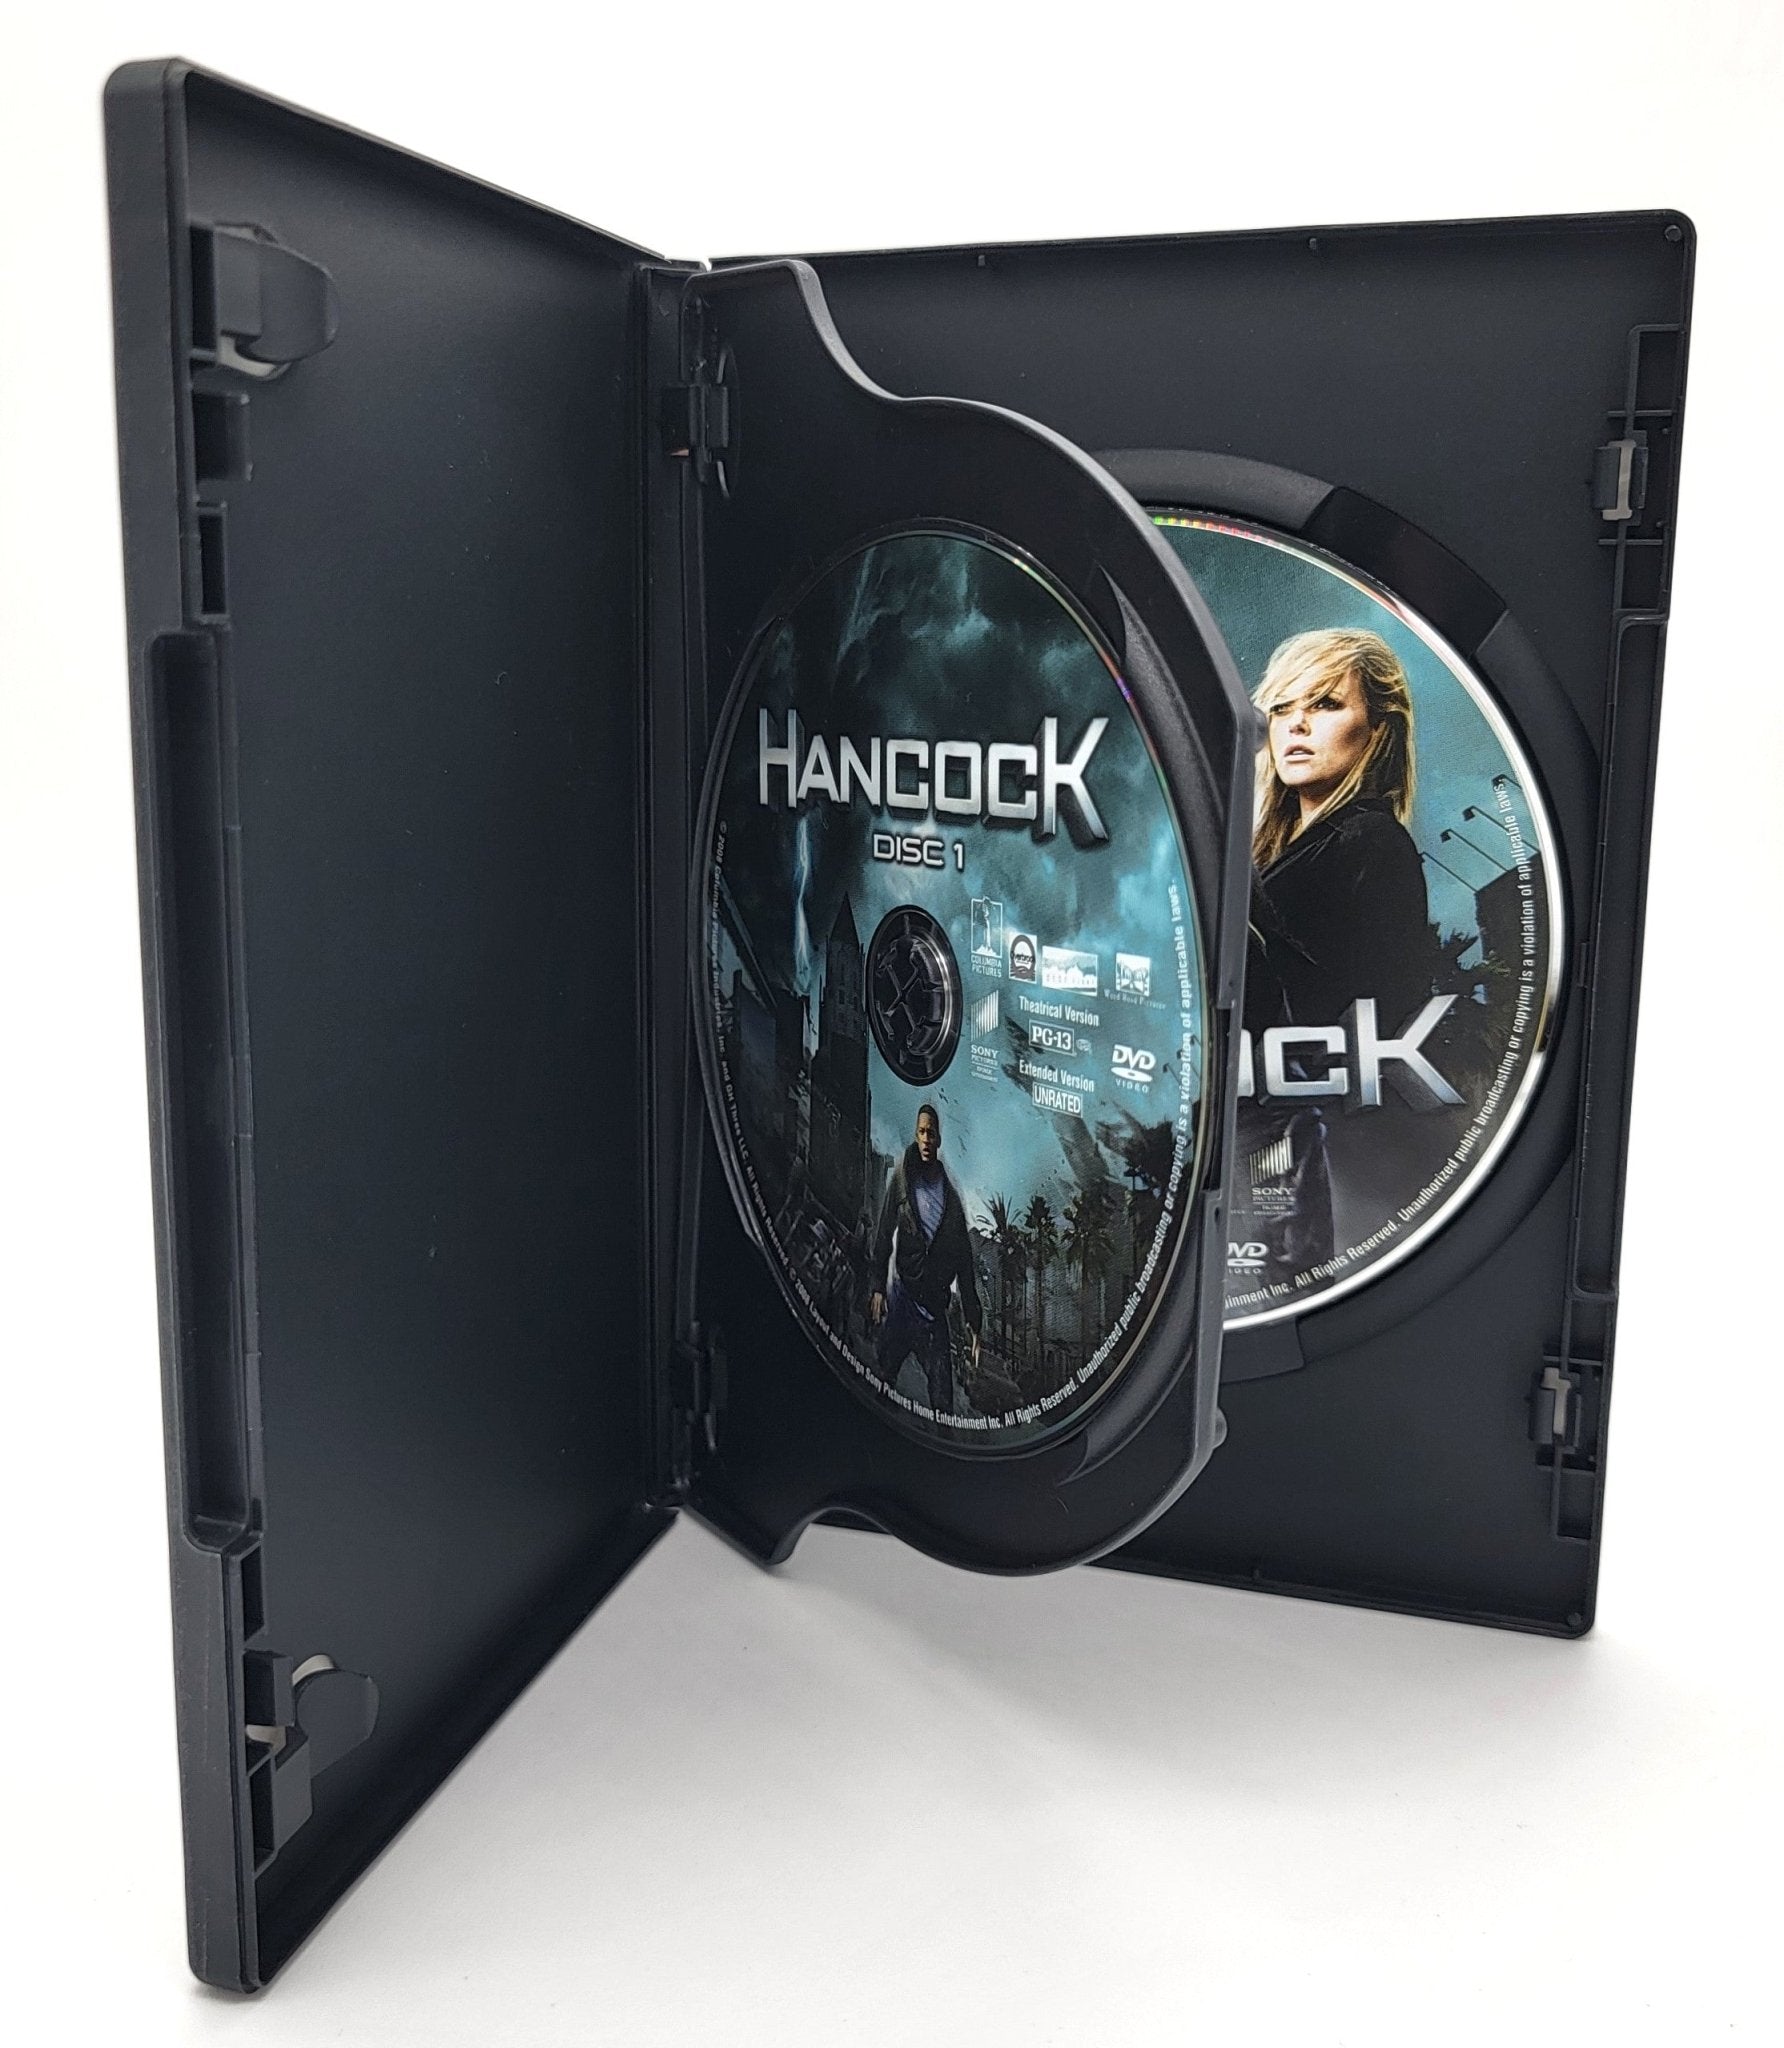 Sony Pictures Home Entertainment - Hancock | DVD | 2 Disc Unrated Special Edition - No Digital Copy - DVD - Steady Bunny Shop